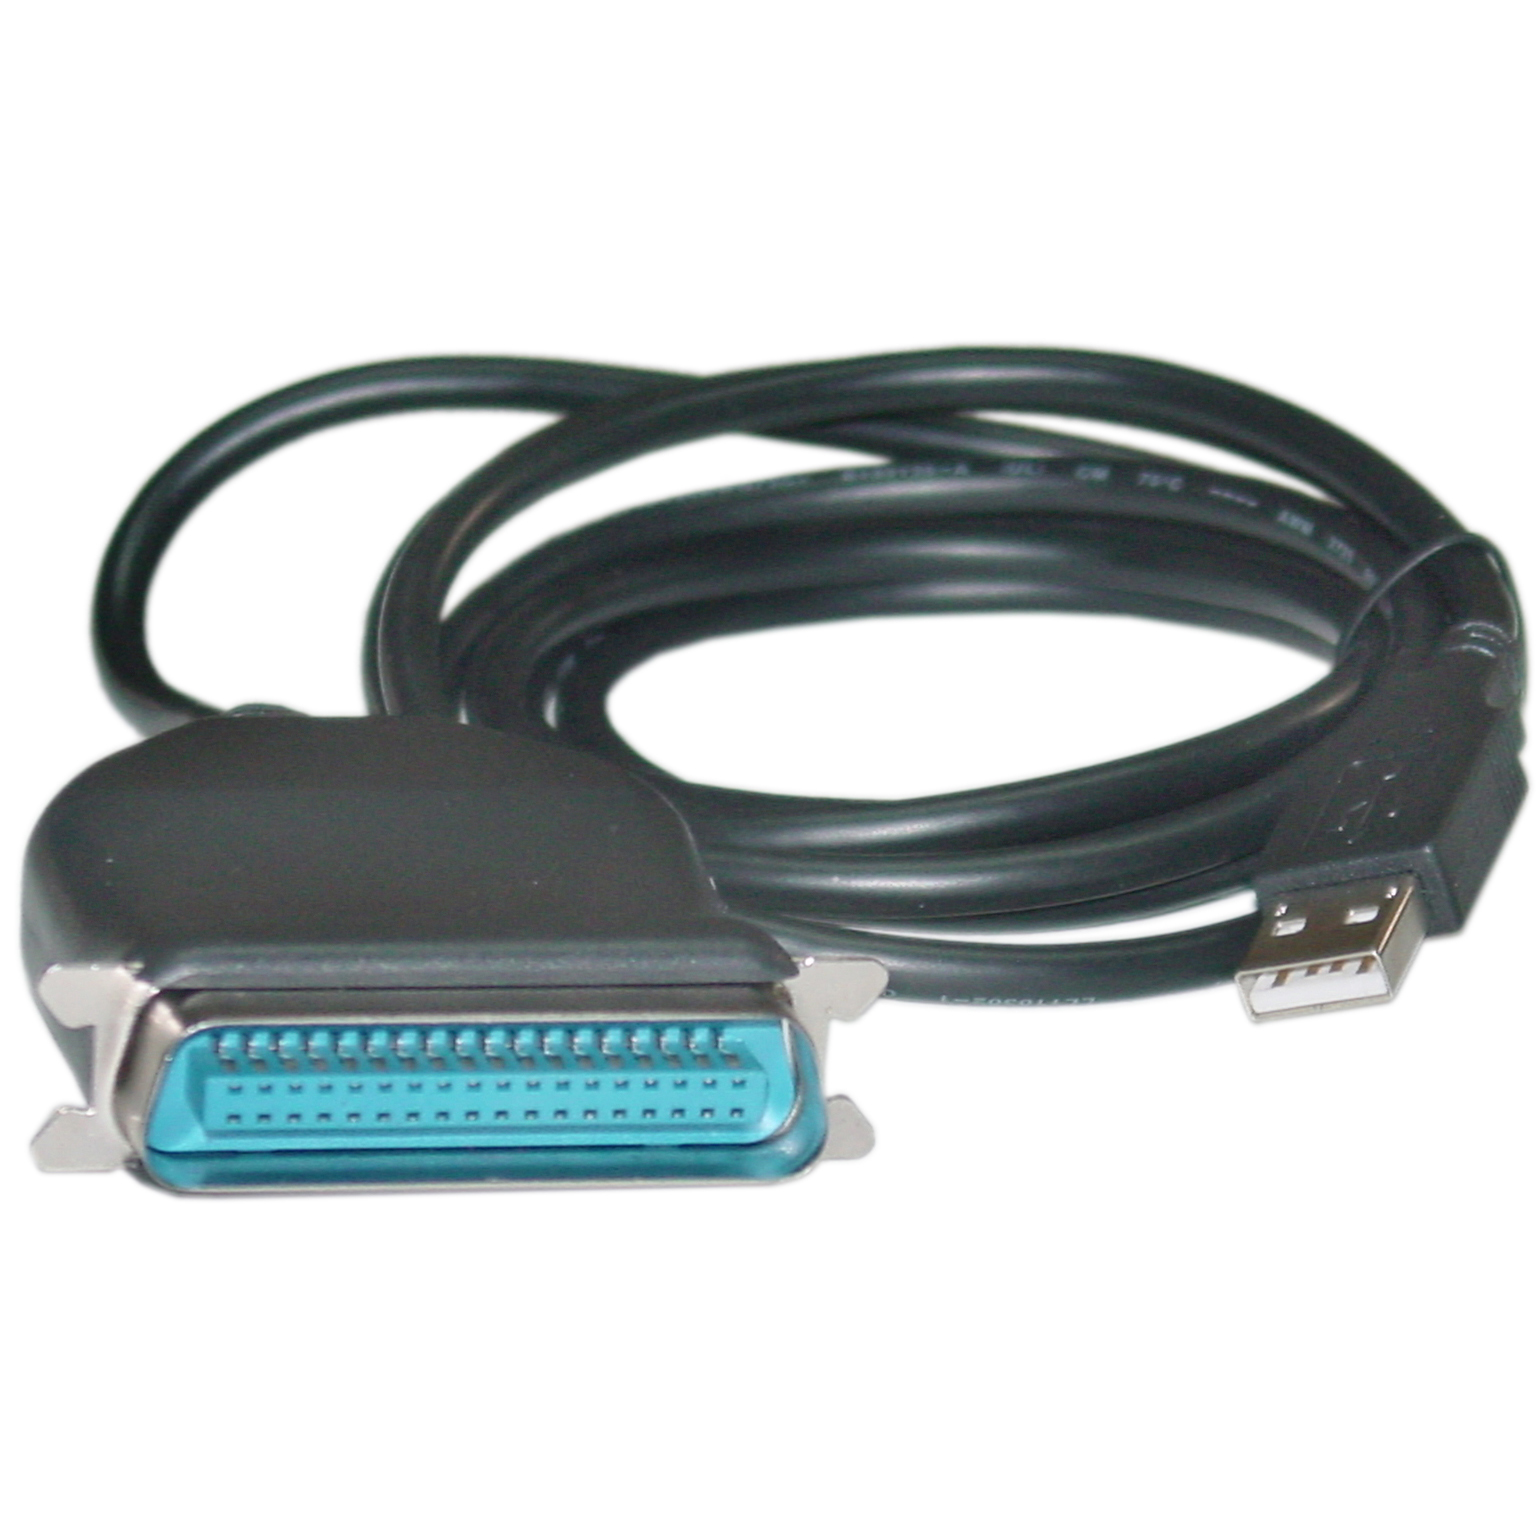 Cable Length: Other Computer Cables USB to Yoton 1284 Parallel Port Adapter Cable 